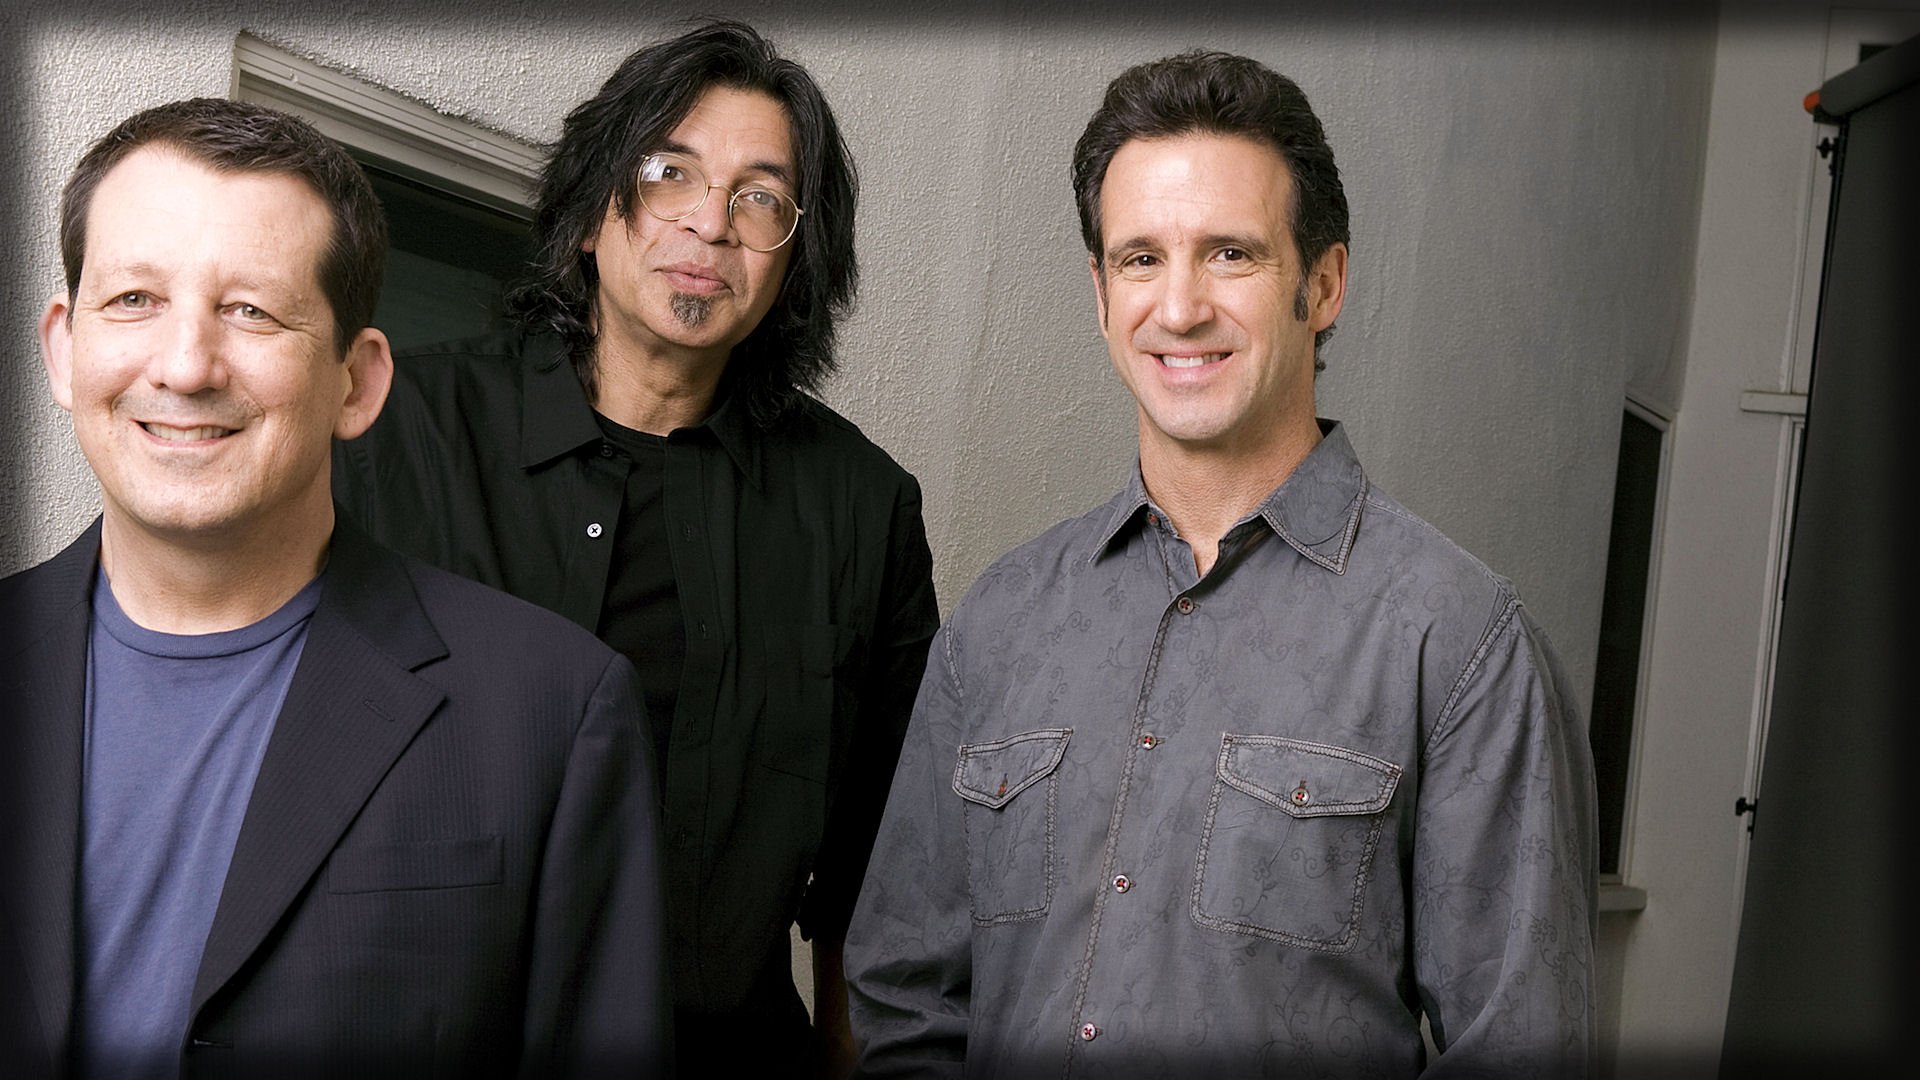 jeff lorber fusion definative collection